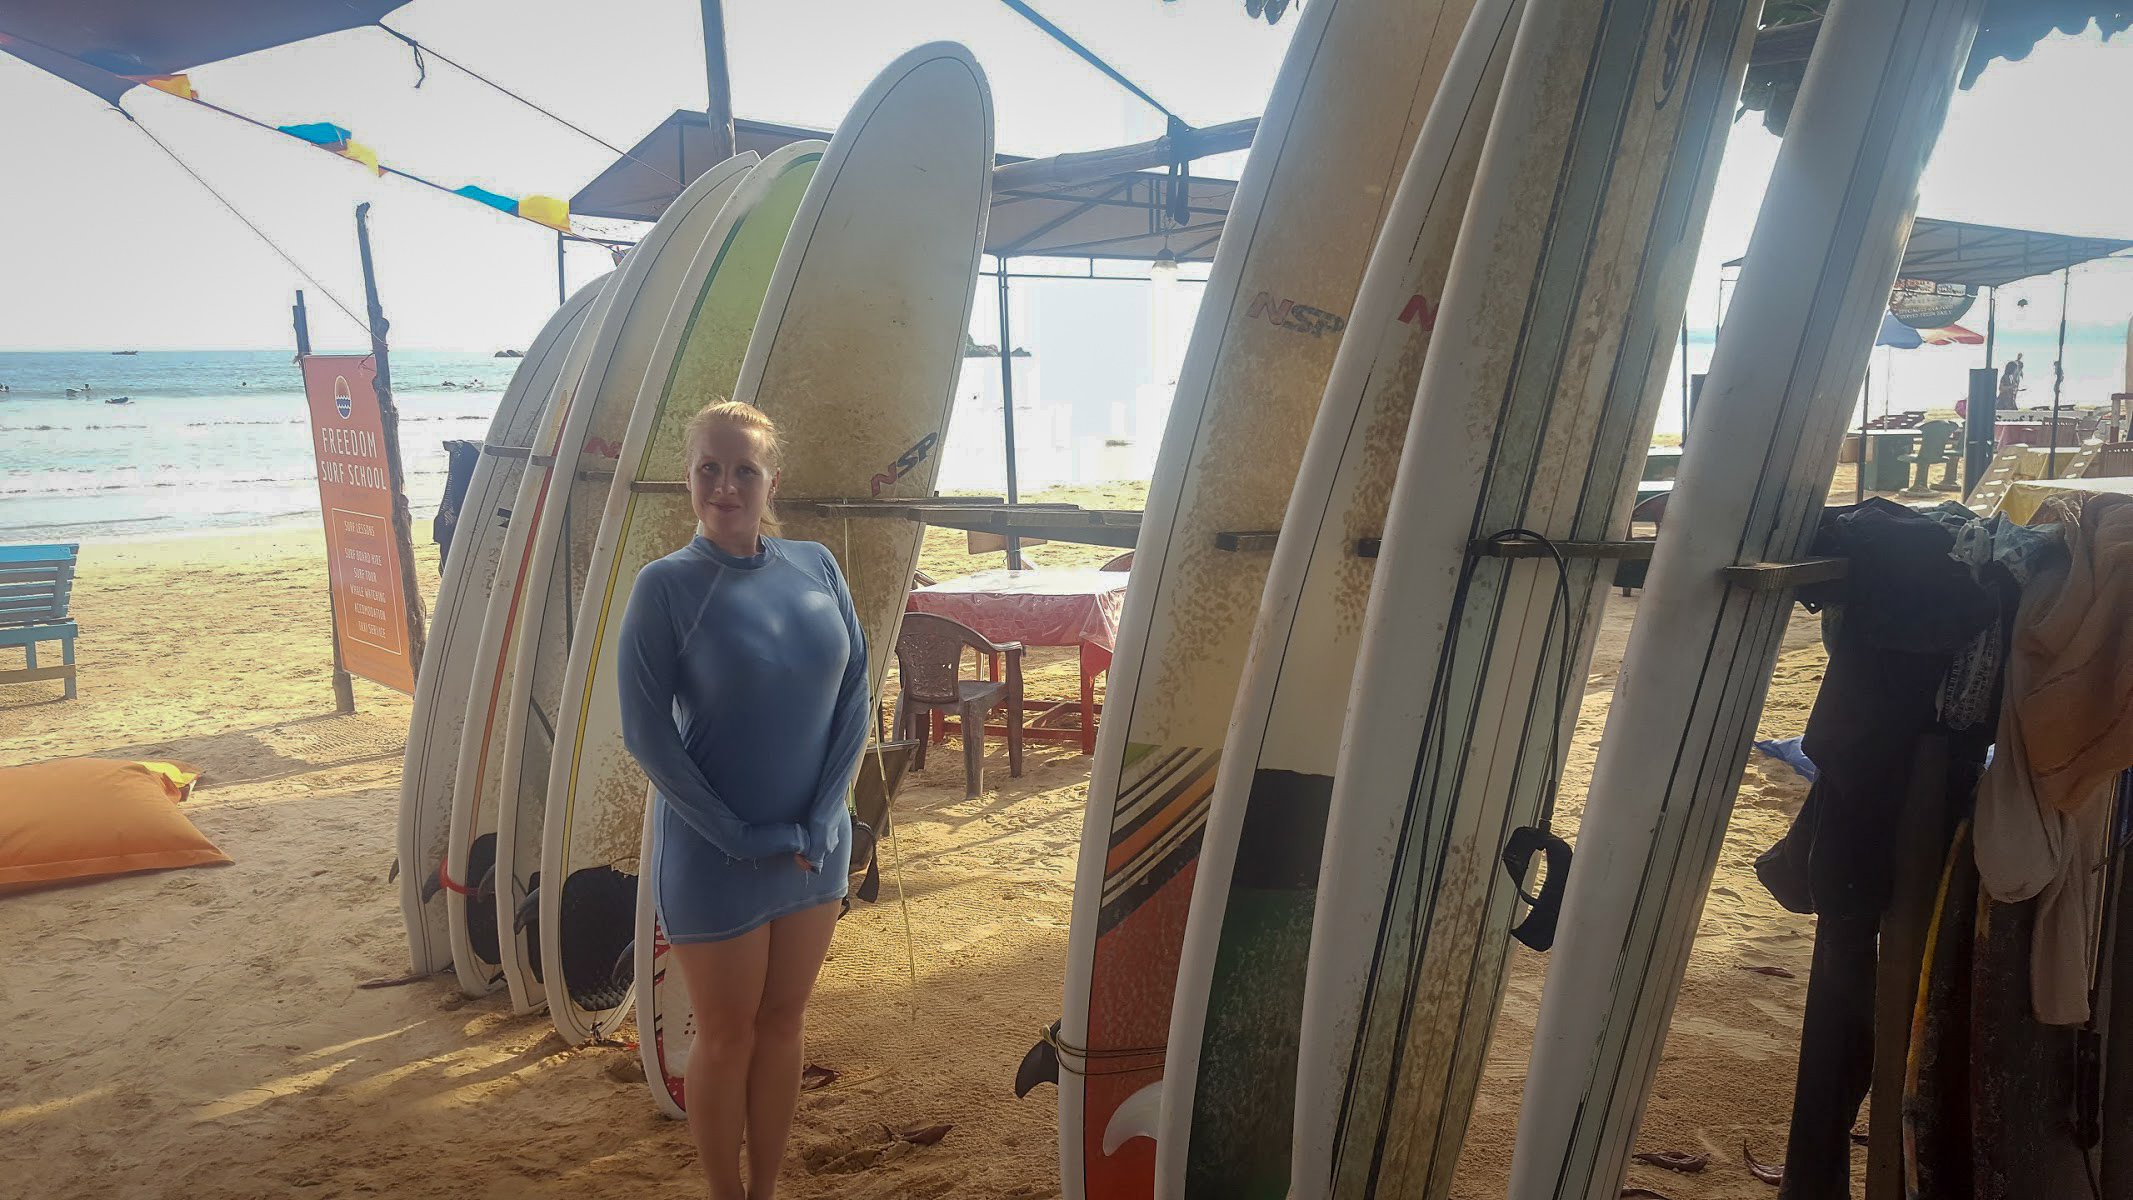 Rosie wearing a blue wet-shirt stands in front of surfboards on the beach in Sri Lanka